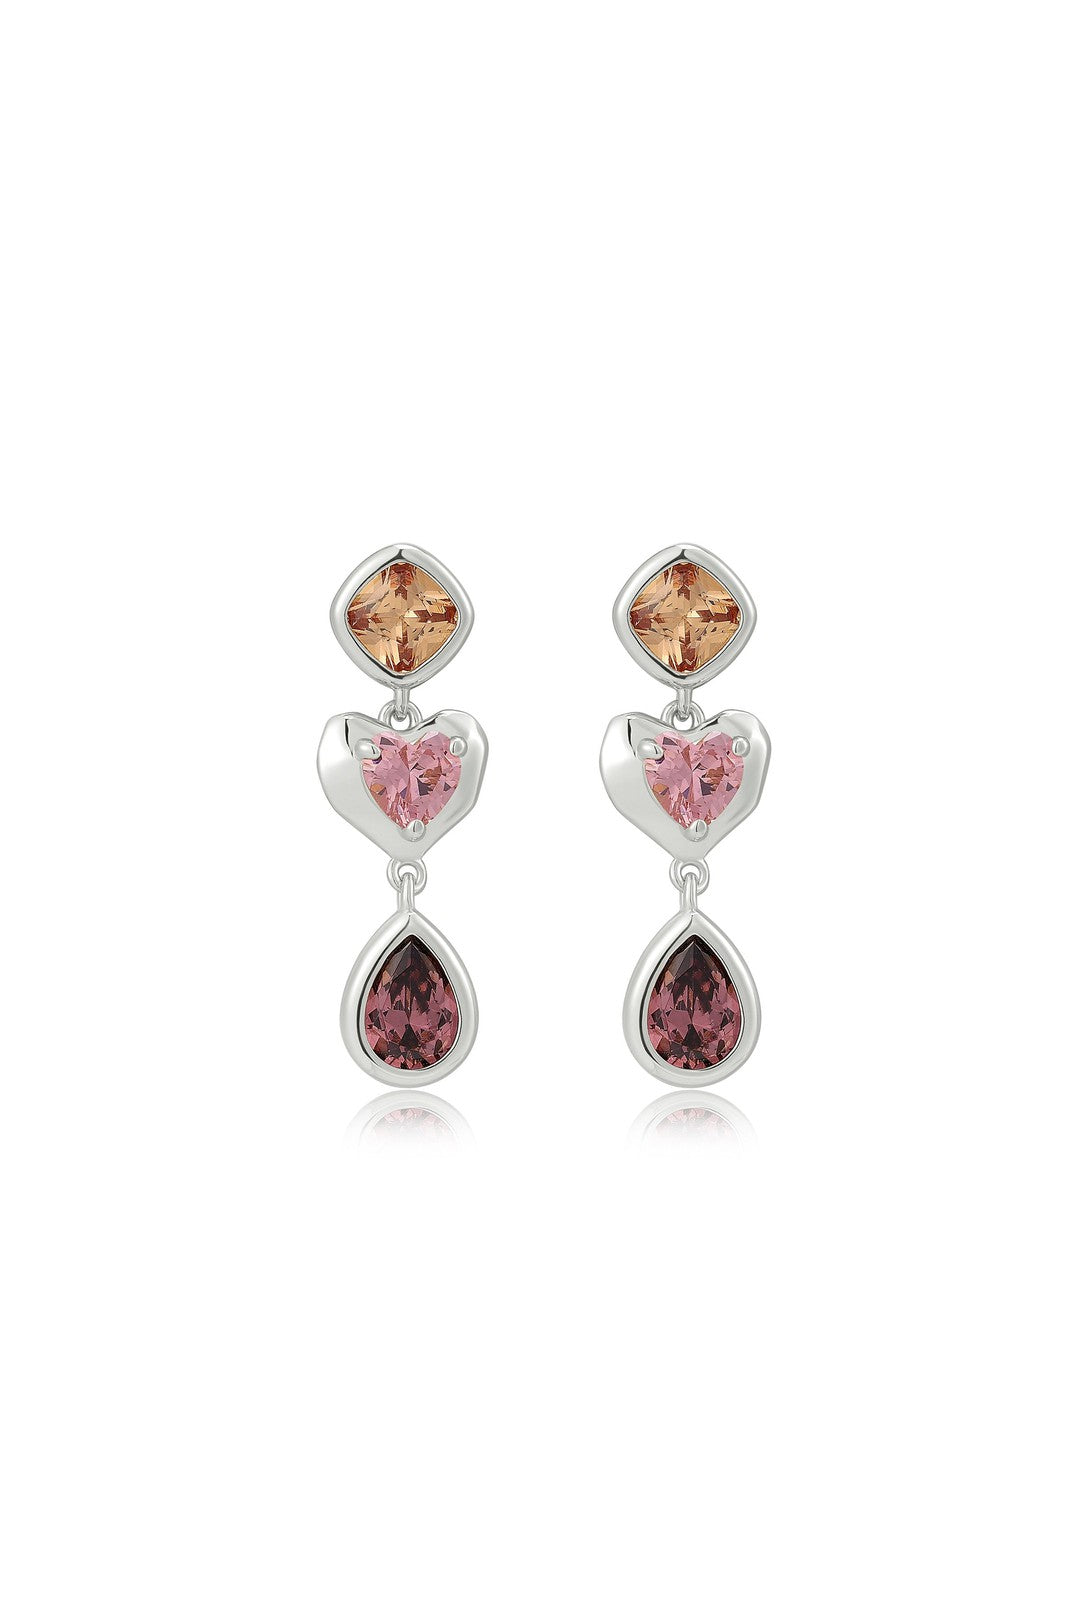 The heart stone studs, silver